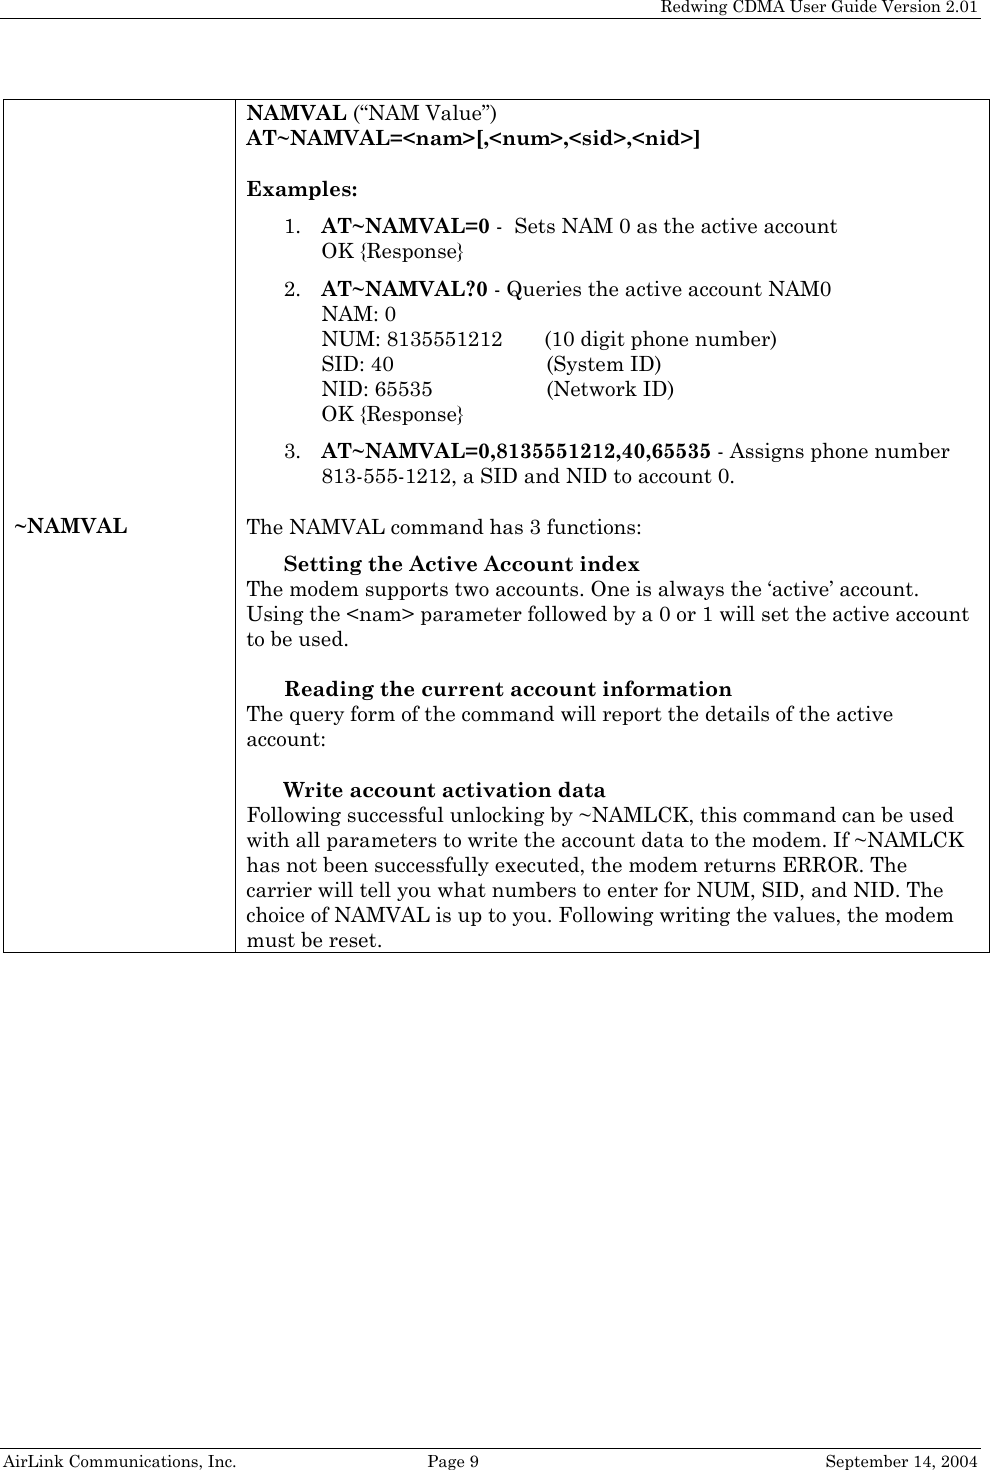   Redwing CDMA User Guide Version 2.01   AirLink Communications, Inc.  Page 9  September 14, 2004 ~NAMVAL NAMVAL (“NAM Value”)  AT~NAMVAL=&lt;nam&gt;[,&lt;num&gt;,&lt;sid&gt;,&lt;nid&gt;]  Examples: 1. AT~NAMVAL=0 -  Sets NAM 0 as the active account  OK {Response} 2. AT~NAMVAL?0 - Queries the active account NAM0 NAM: 0 NUM: 8135551212    (10 digit phone number) SID: 40   (System ID) NID: 65535    (Network ID) OK {Response} 3. AT~NAMVAL=0,8135551212,40,65535 - Assigns phone number 813-555-1212, a SID and NID to account 0.  The NAMVAL command has 3 functions: Setting the Active Account index  The modem supports two accounts. One is always the ‘active’ account. Using the &lt;nam&gt; parameter followed by a 0 or 1 will set the active account to be used.  Reading the current account information  The query form of the command will report the details of the active account:  Write account activation data  Following successful unlocking by ~NAMLCK, this command can be used with all parameters to write the account data to the modem. If ~NAMLCK has not been successfully executed, the modem returns ERROR. The carrier will tell you what numbers to enter for NUM, SID, and NID. The choice of NAMVAL is up to you. Following writing the values, the modem must be reset.   